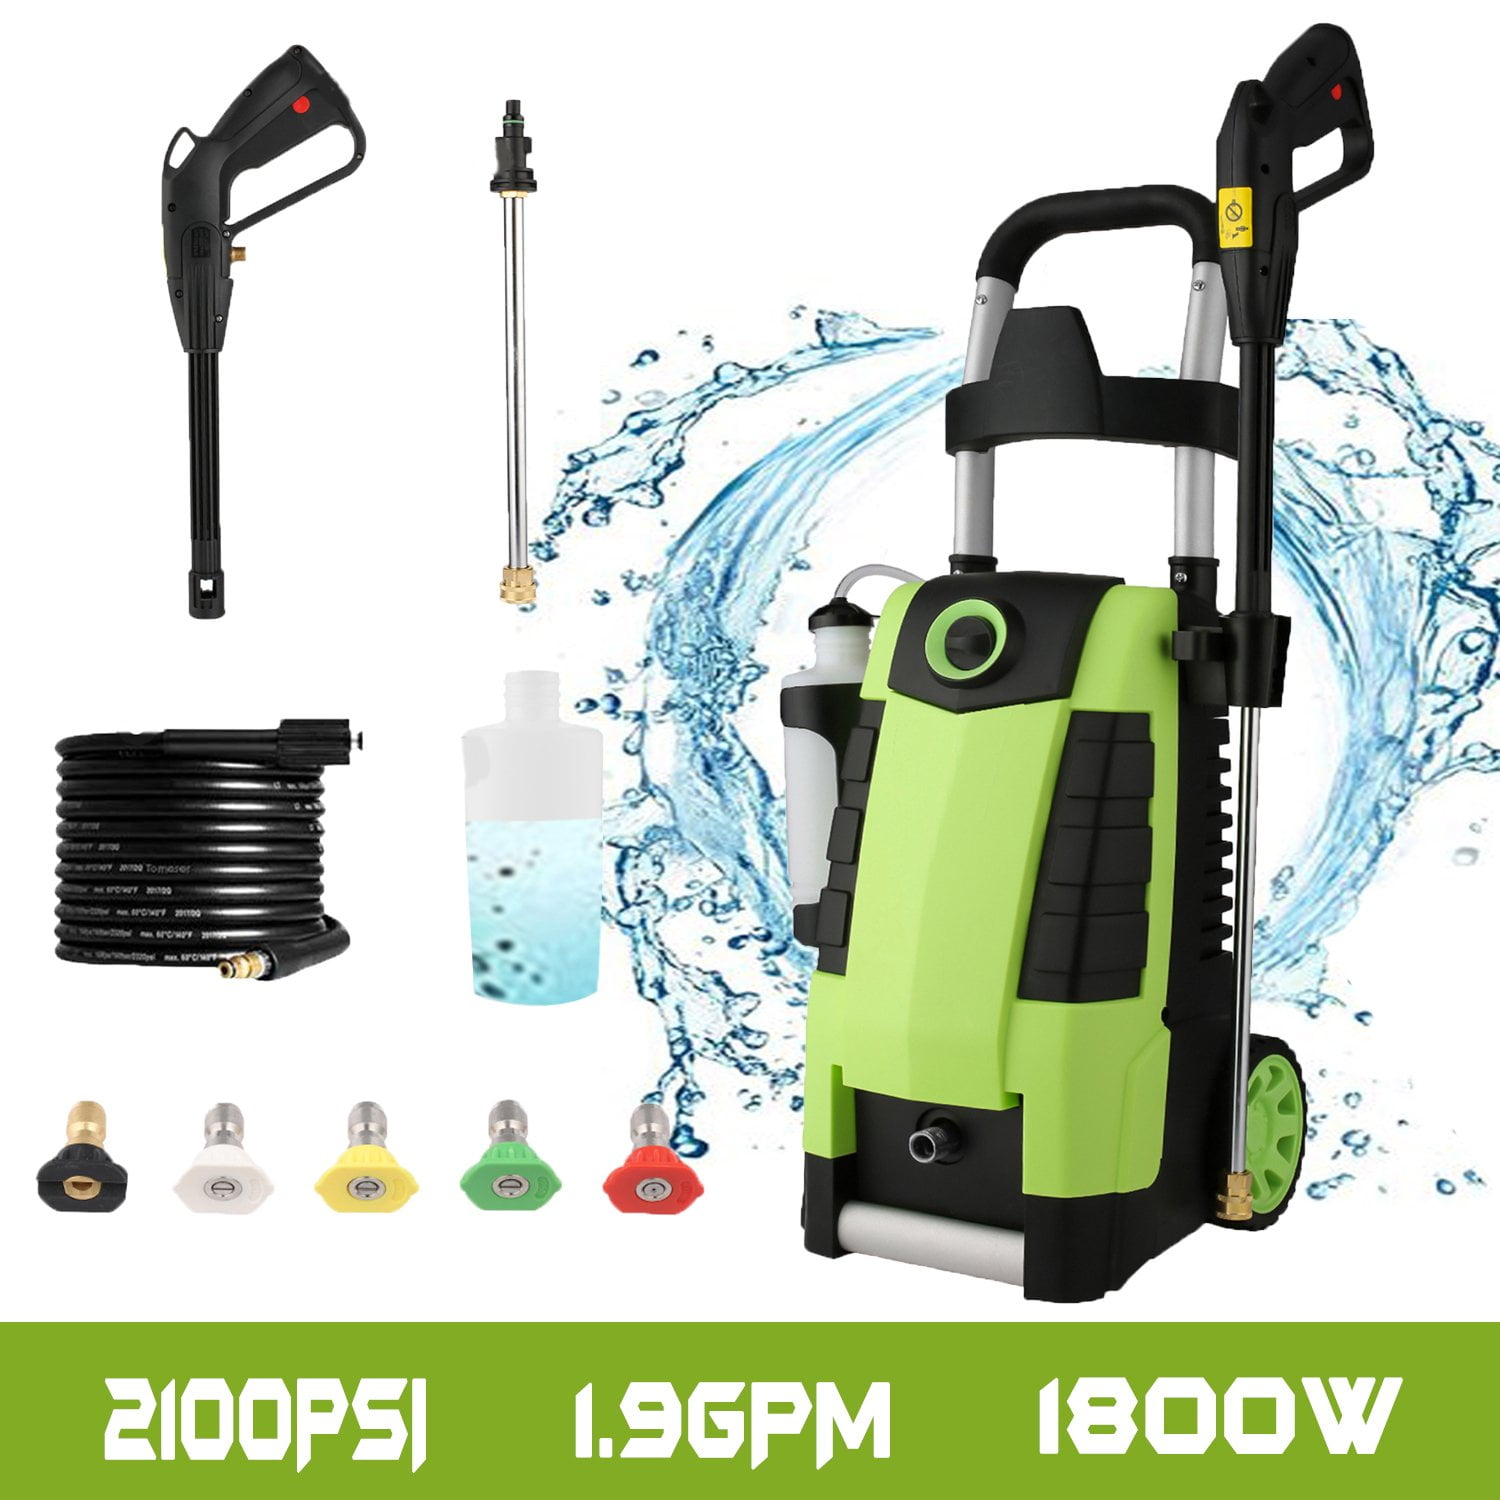 2.6GPM High Pressure Washer Homdox 3500PSI Electric Pressure Washer 1800W Power Washer Professional Washer Cleaner,4 Nozzles,HM5226 